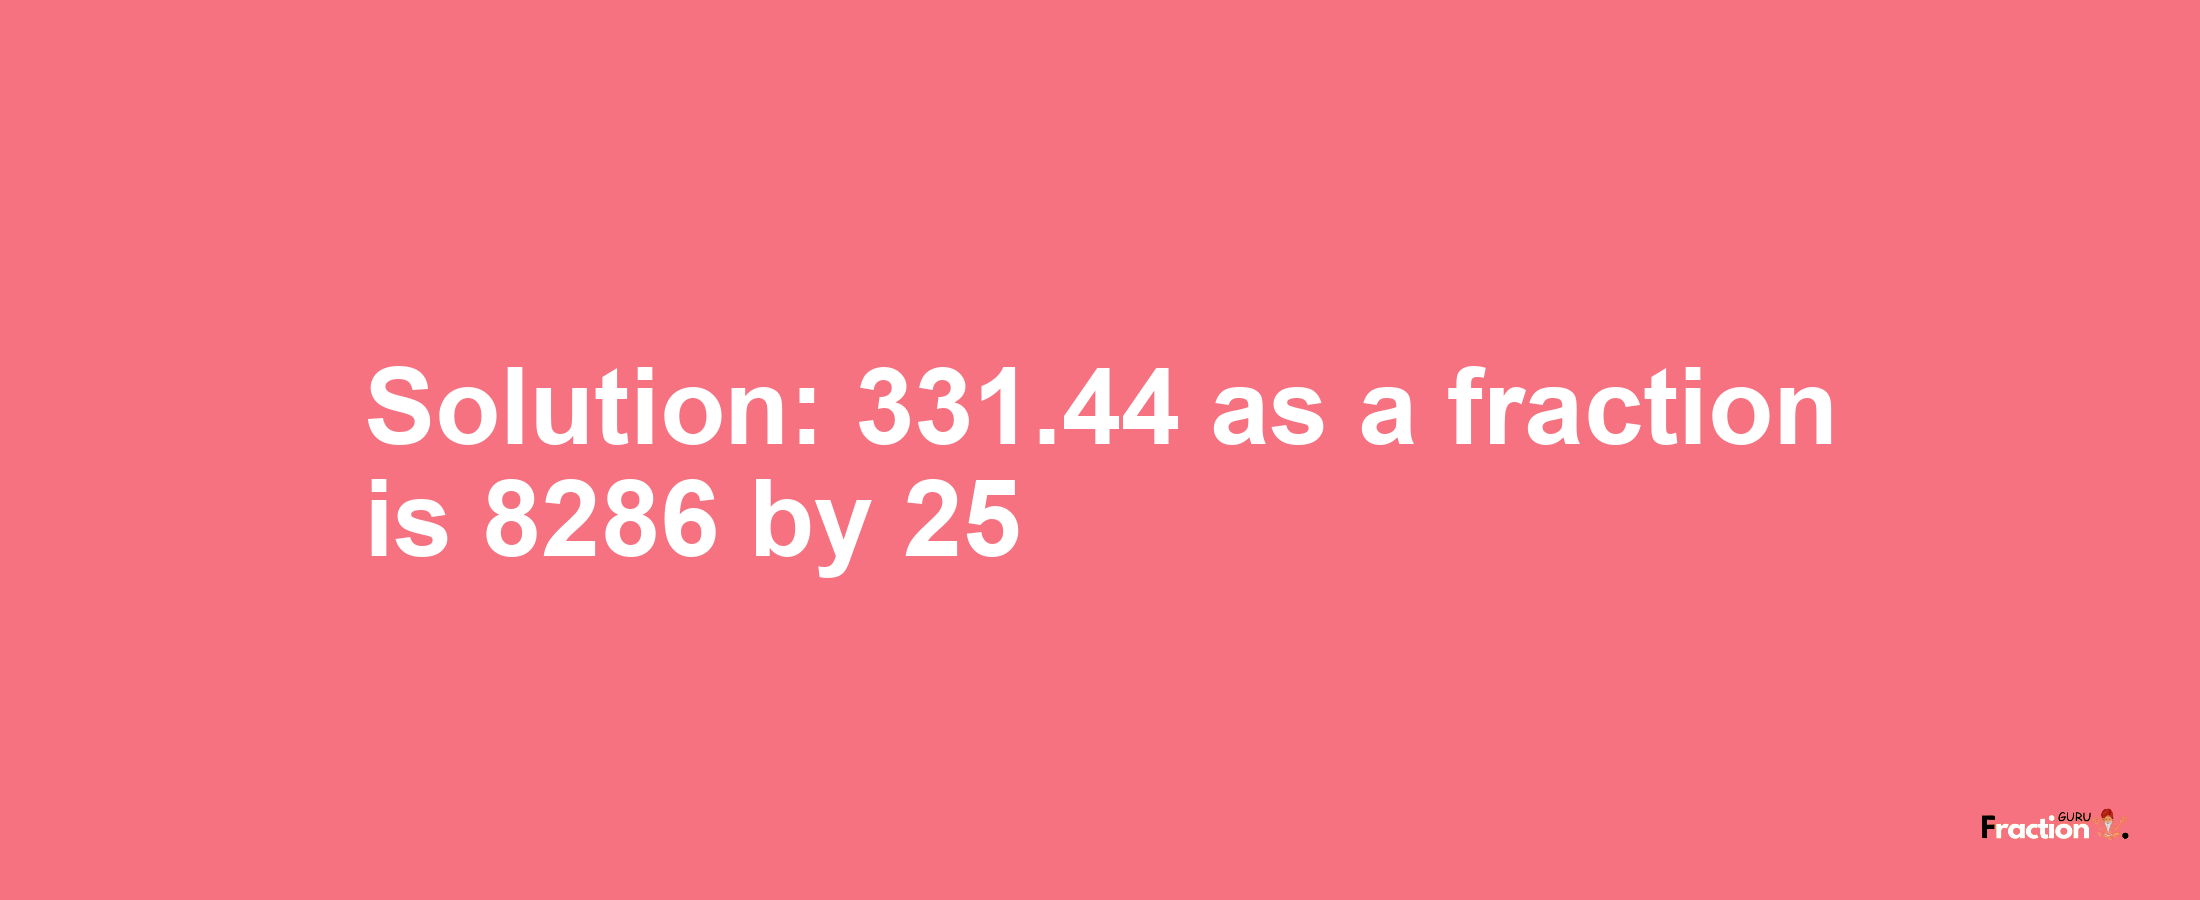 Solution:331.44 as a fraction is 8286/25